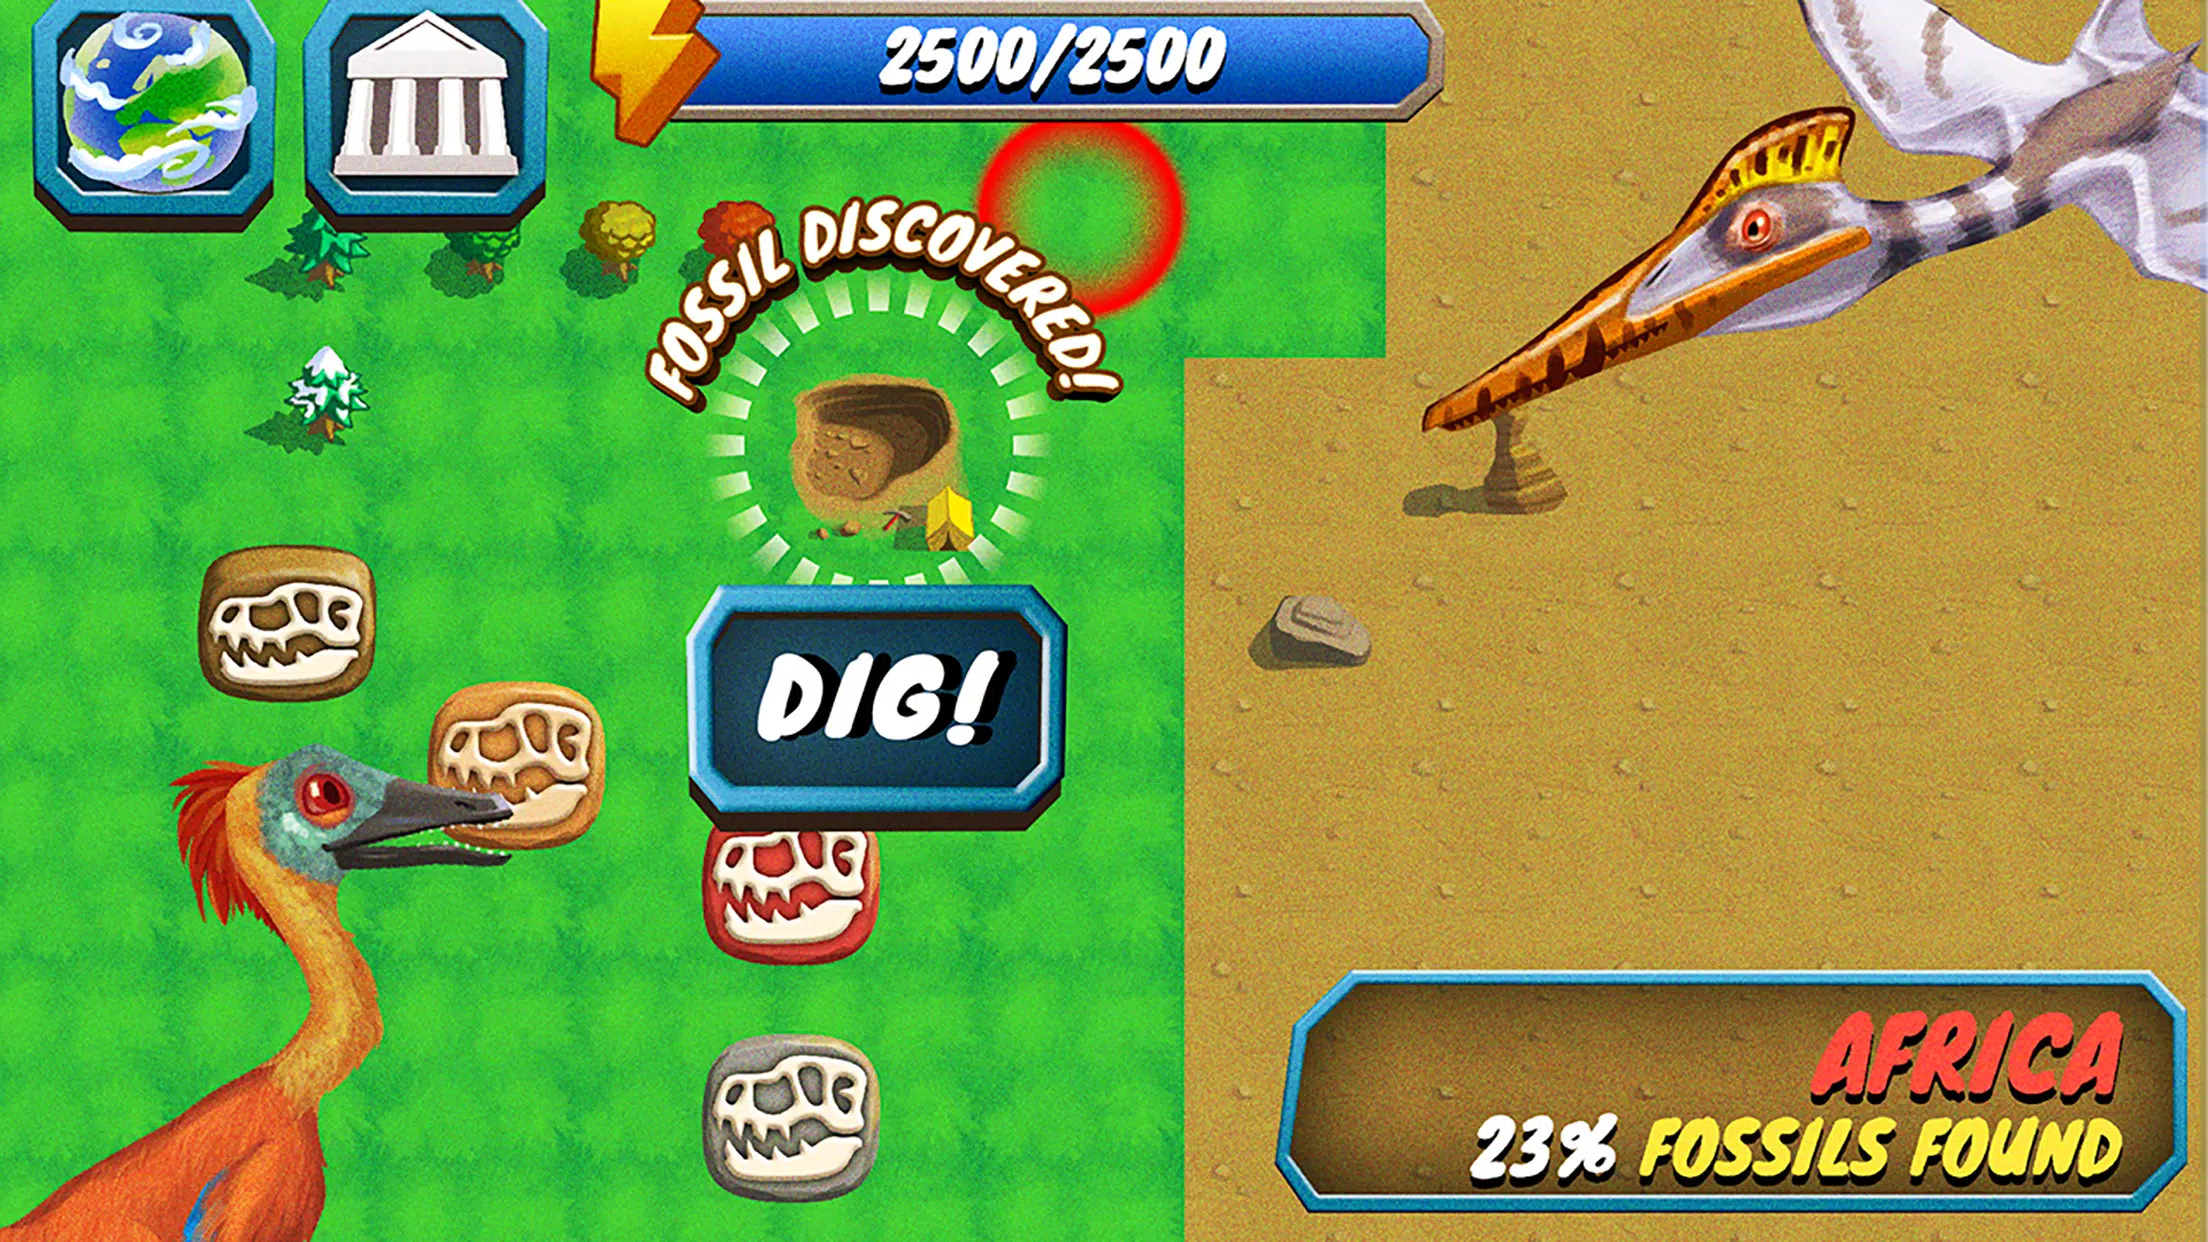 No Root - Dino Quest Dinosaur Games - Unlimited Money Android Mod APK +  Free Download